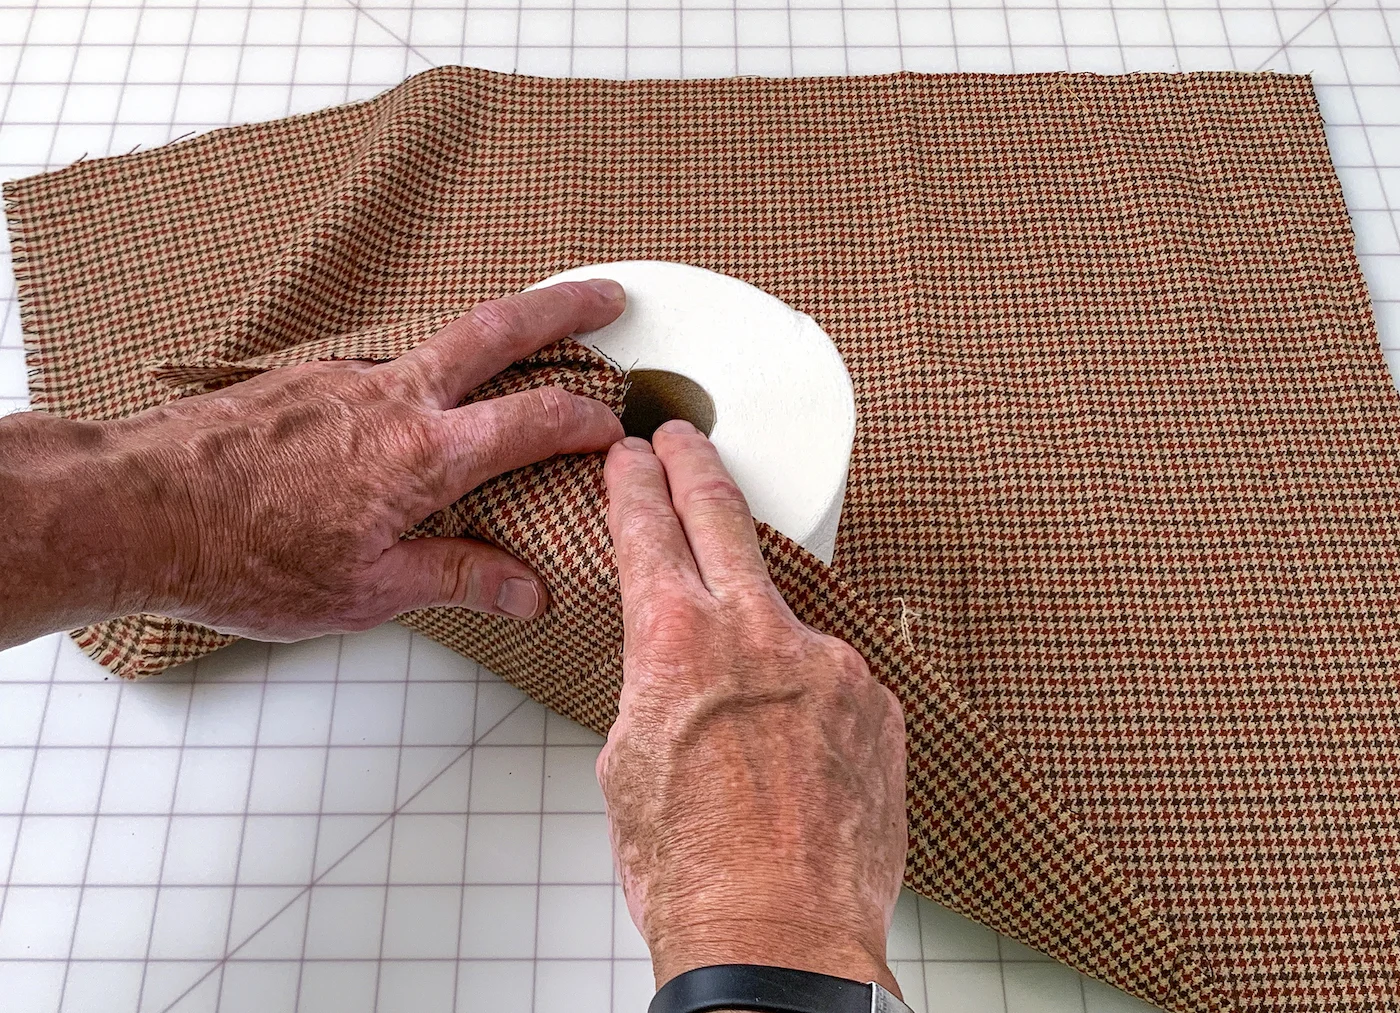 Beginning to tuck fabric into a roll of toilet paper